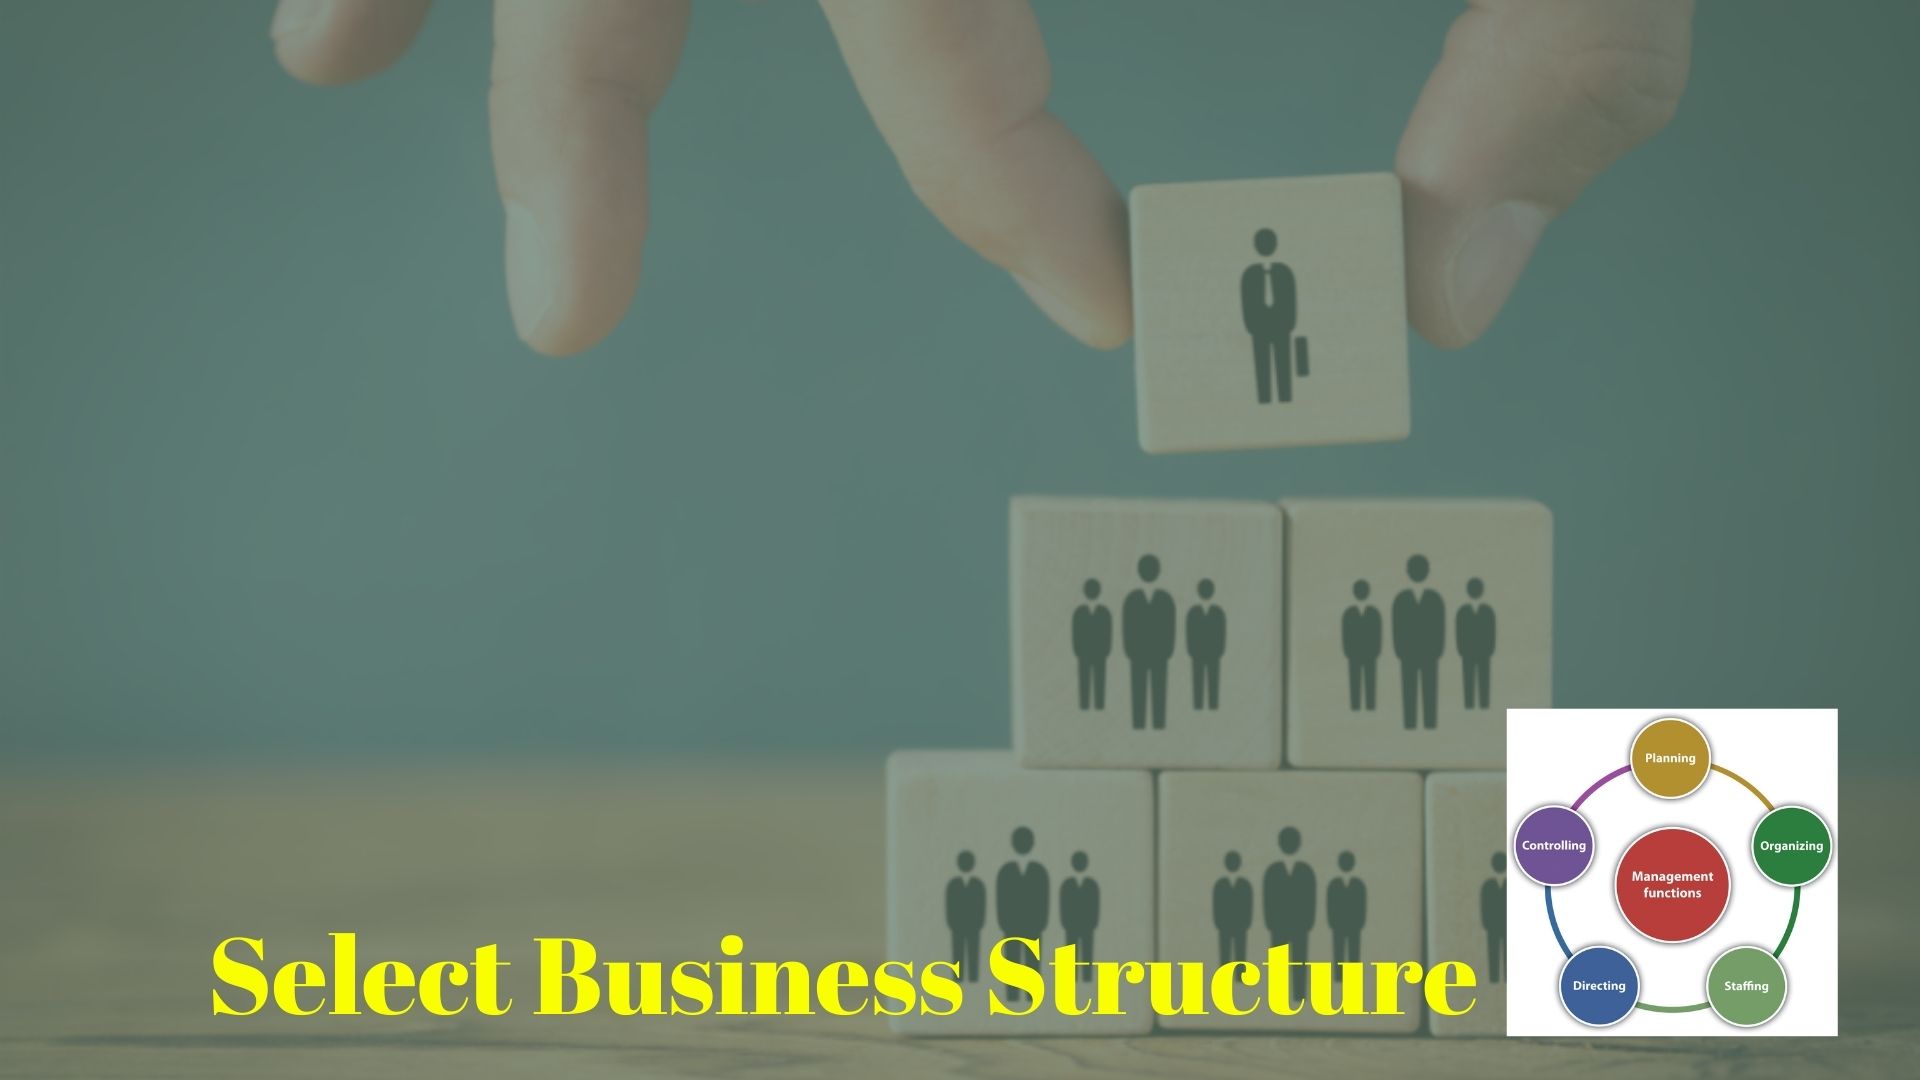 Select the eCommerce Business Structure